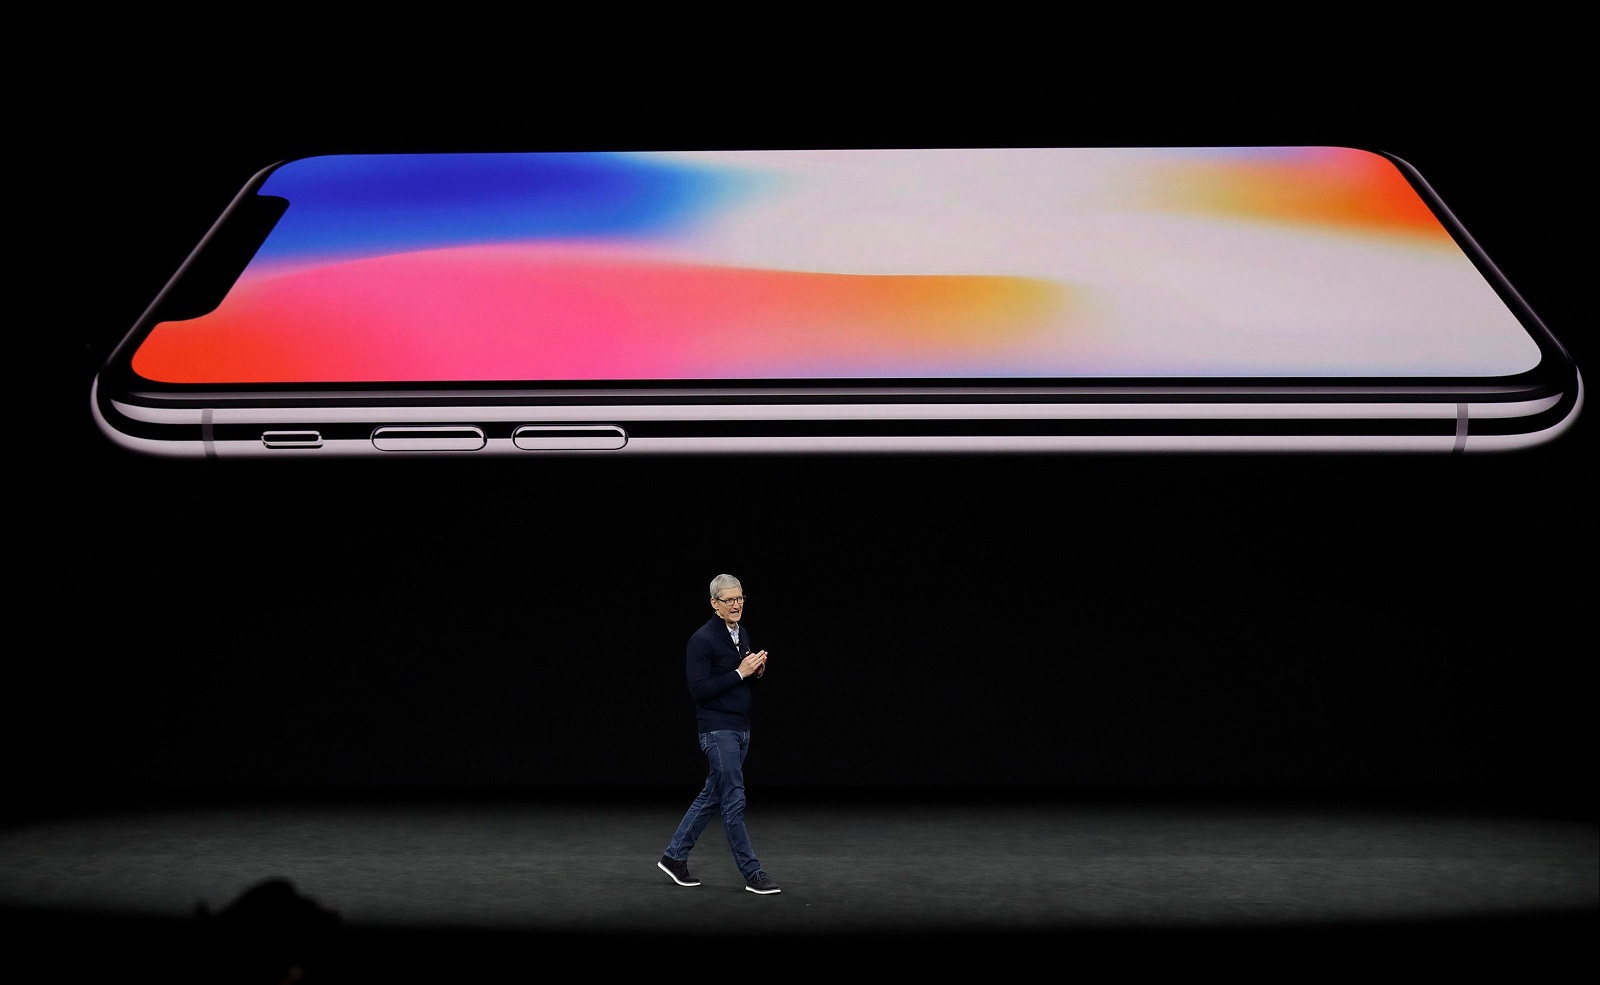 Apple event 2018 live stream: How to watch Apple #39 s big iPhone Xs event